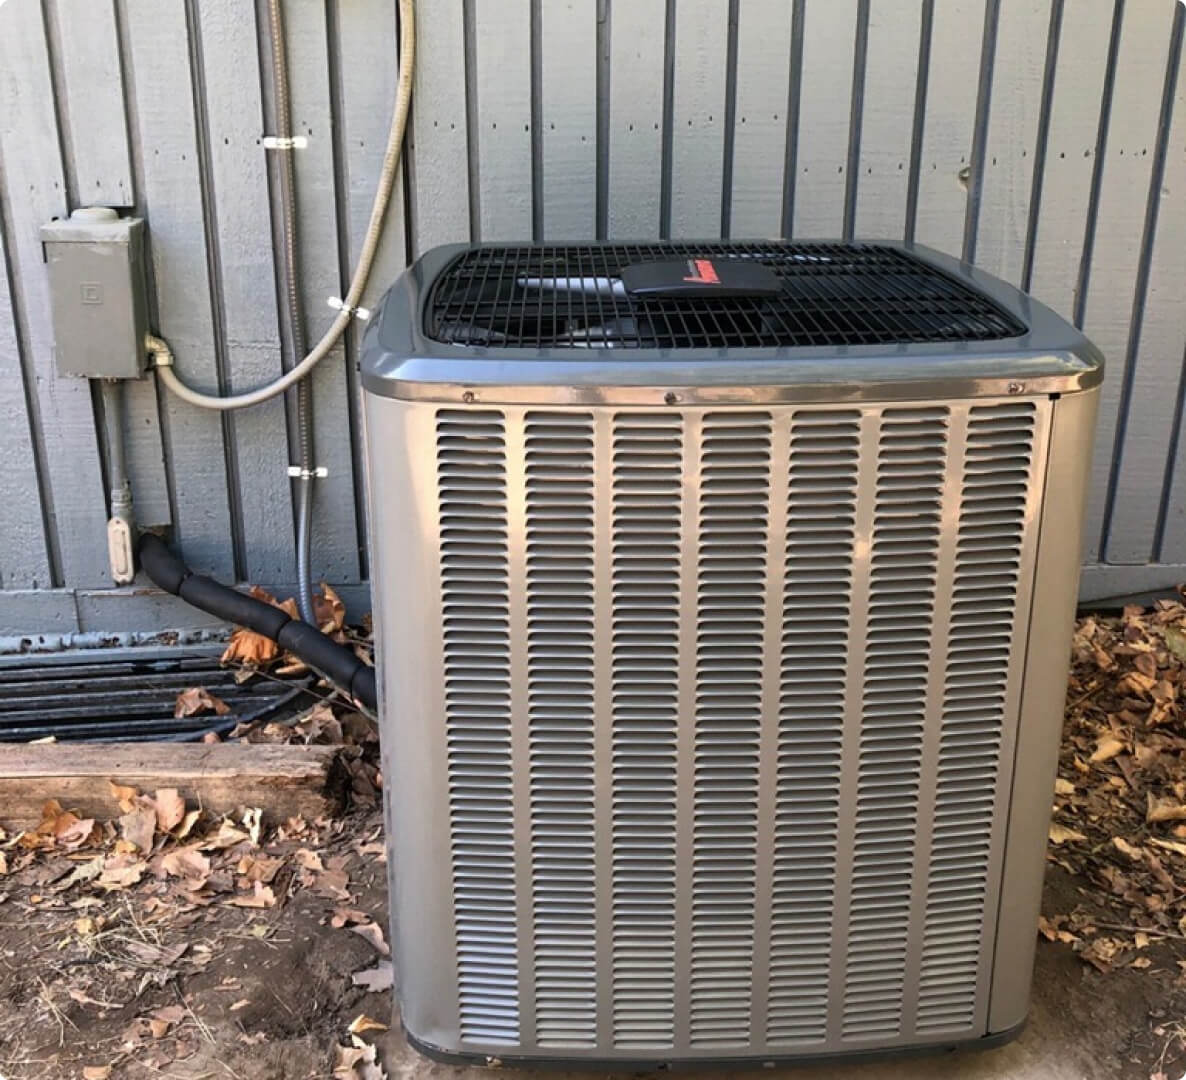 Outdoor central air conditioning unit beside house.